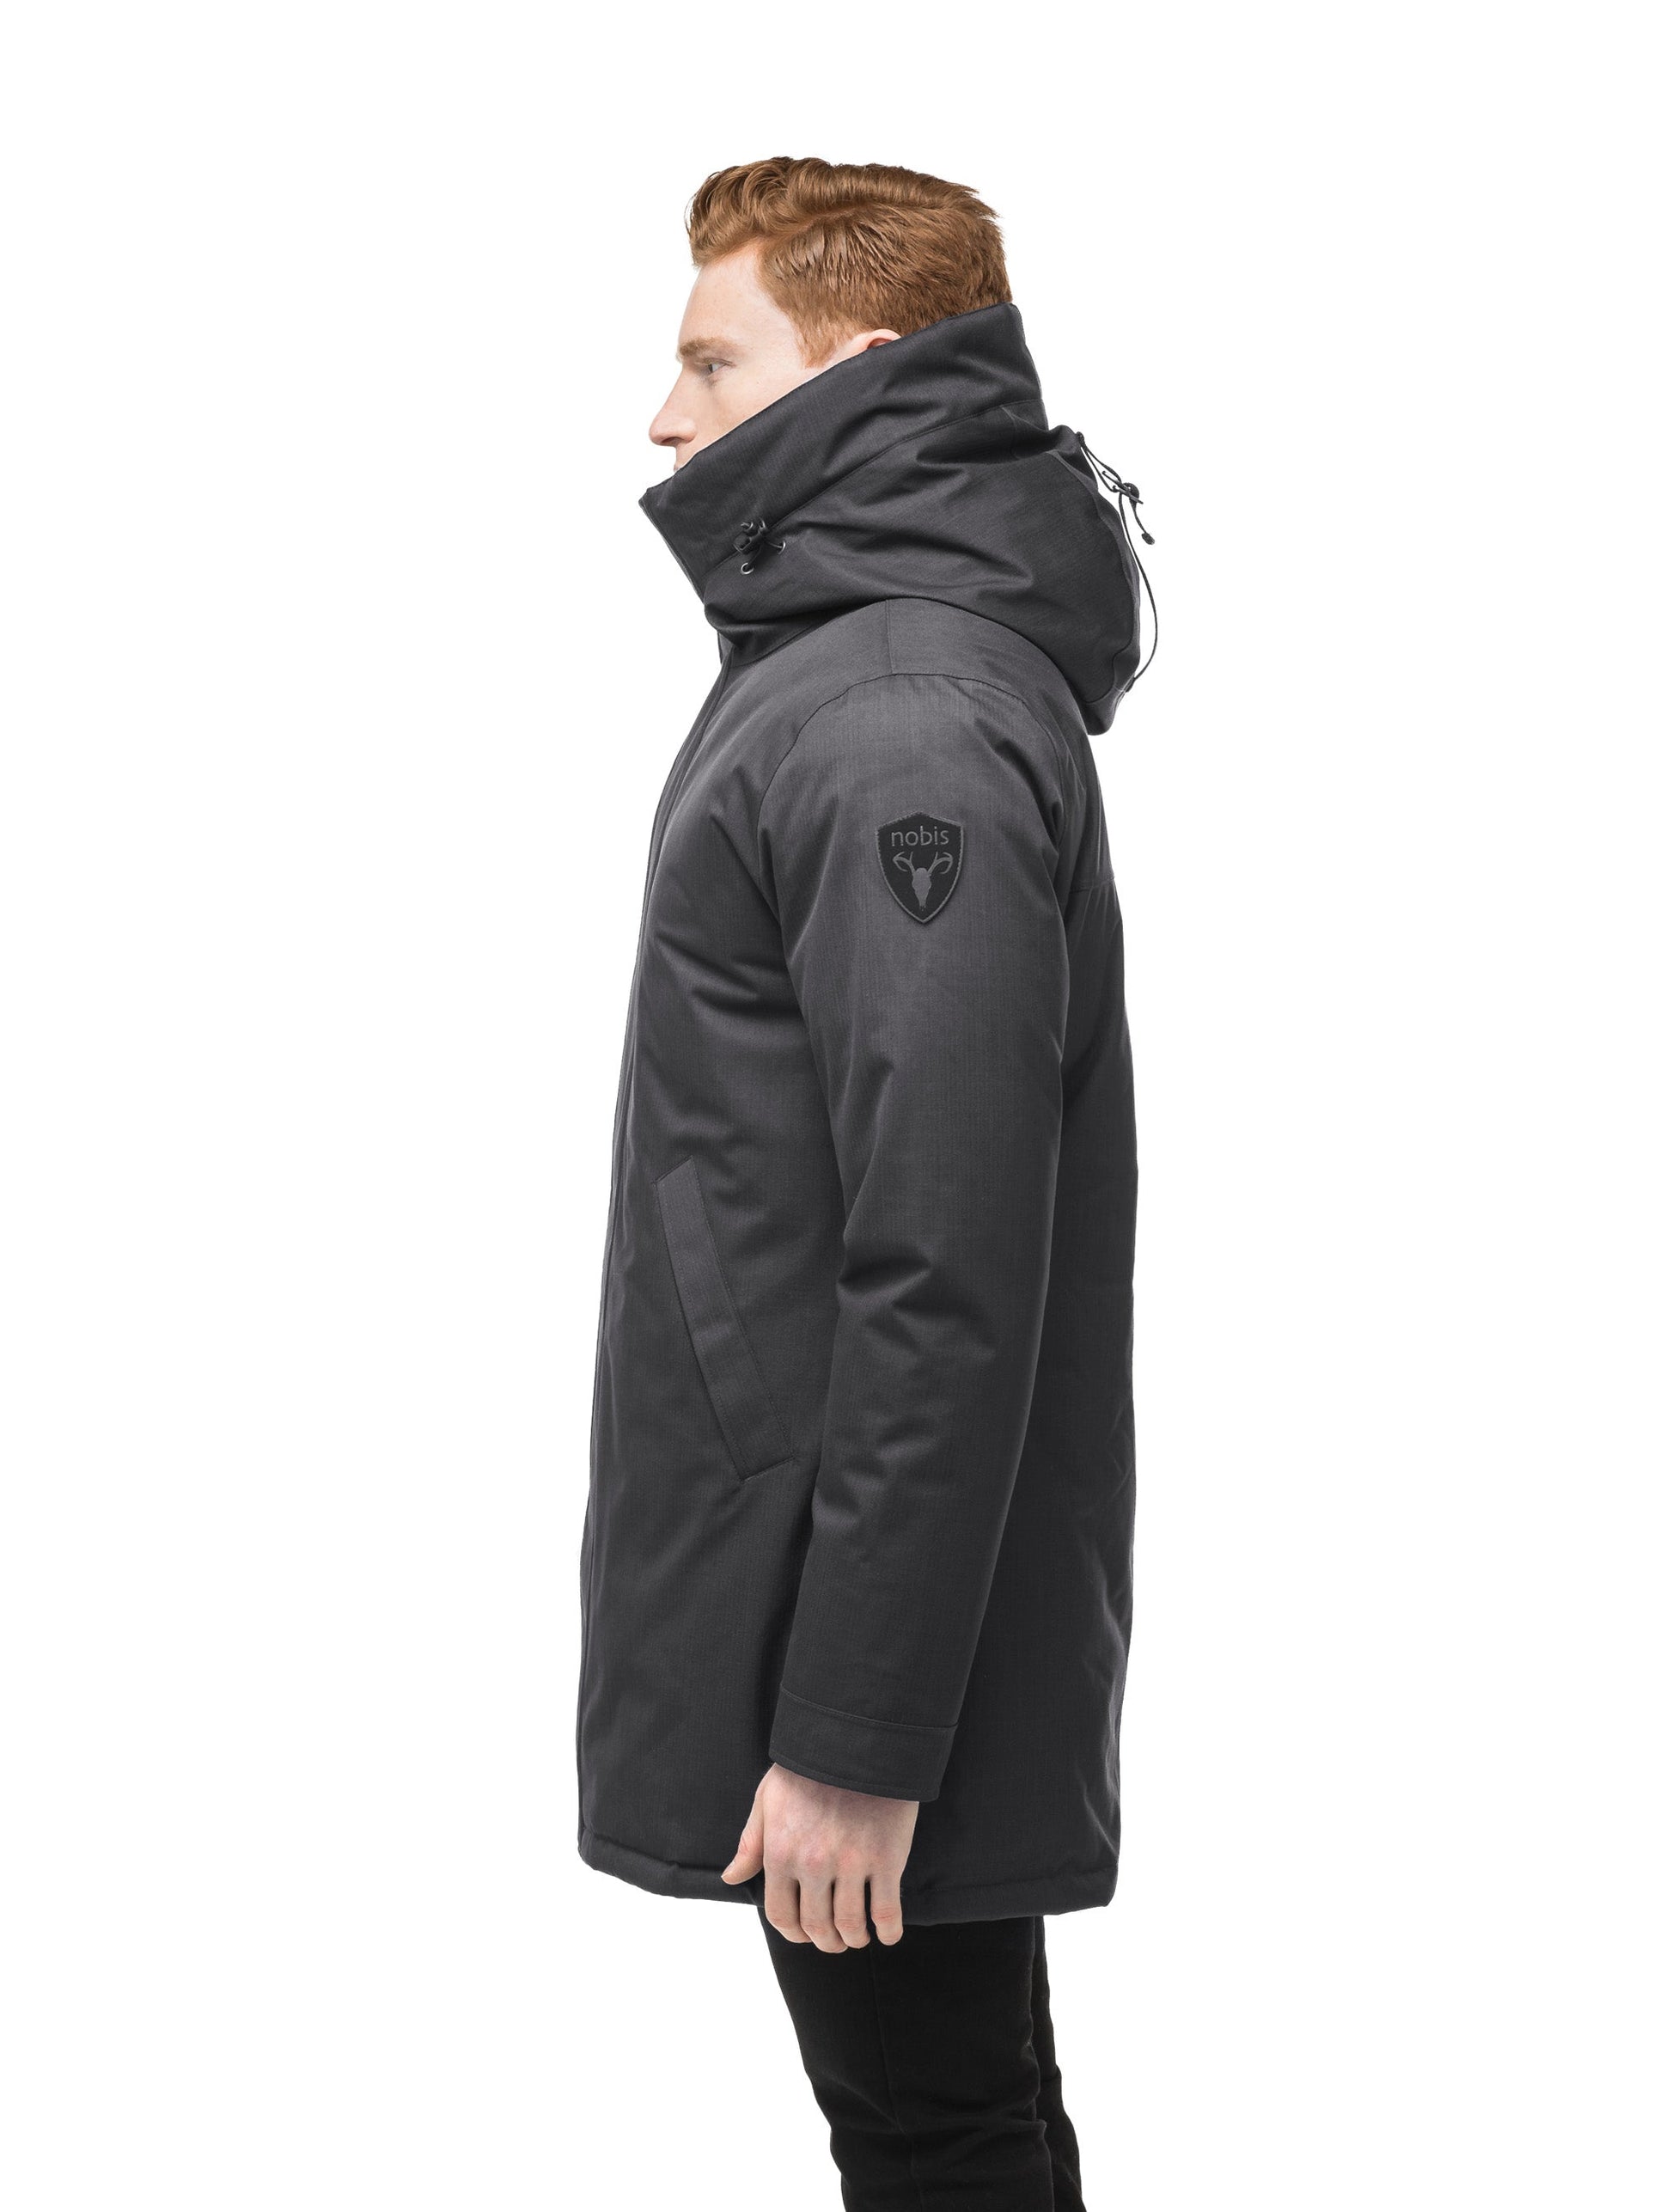 Pierre Men's Jacket in thigh length, Canadian white duck down insulation, non-removable down-filled hood, angled waist pockets, centre-front zipper with wind flap, and elastic ribbed cuffs, in Steel Grey